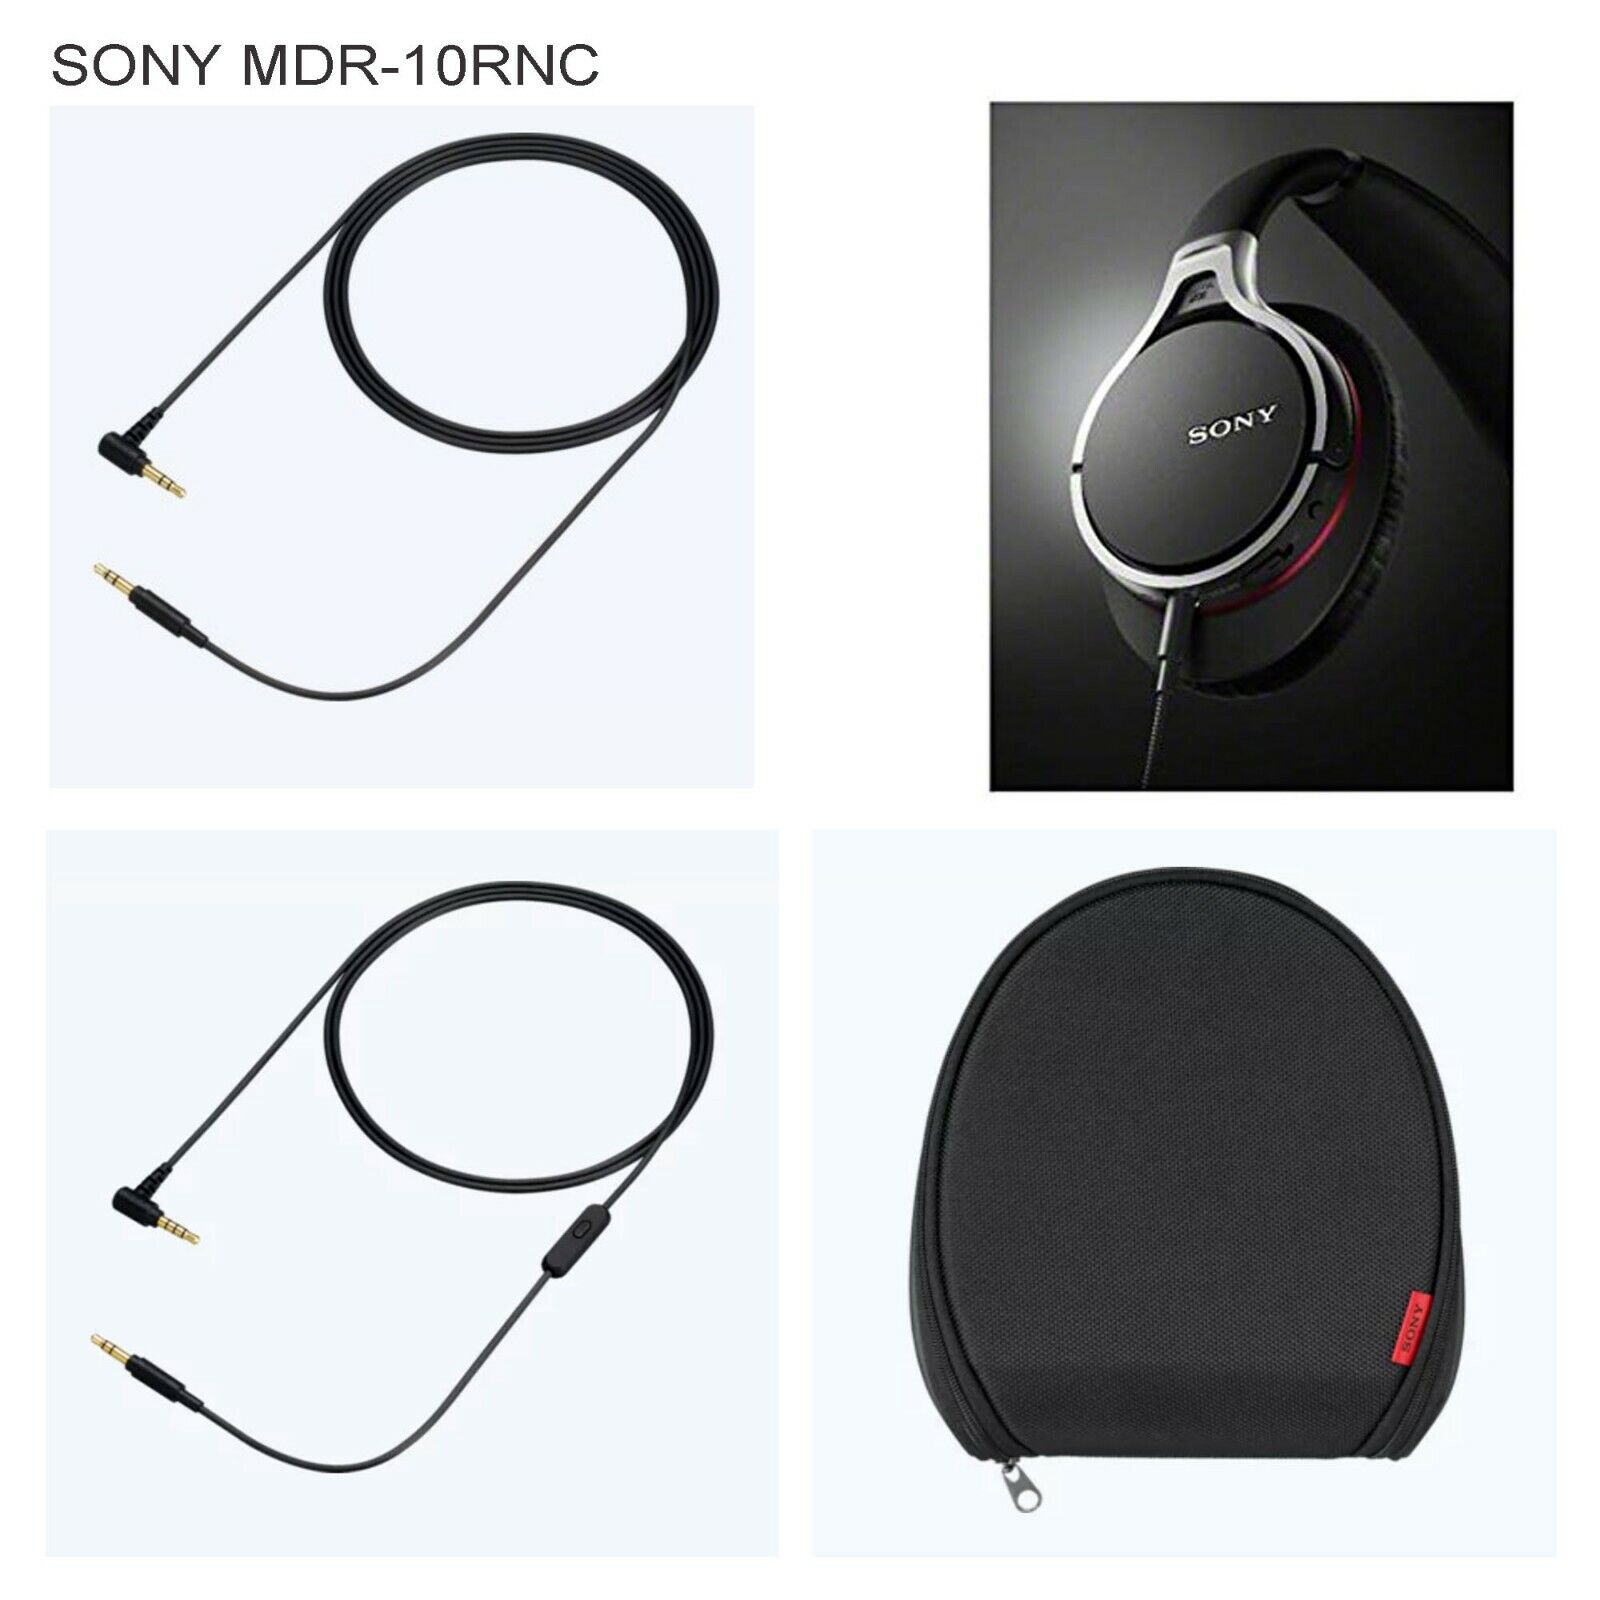 Sony MDR10RNC Premium headphones, cord, and its bag